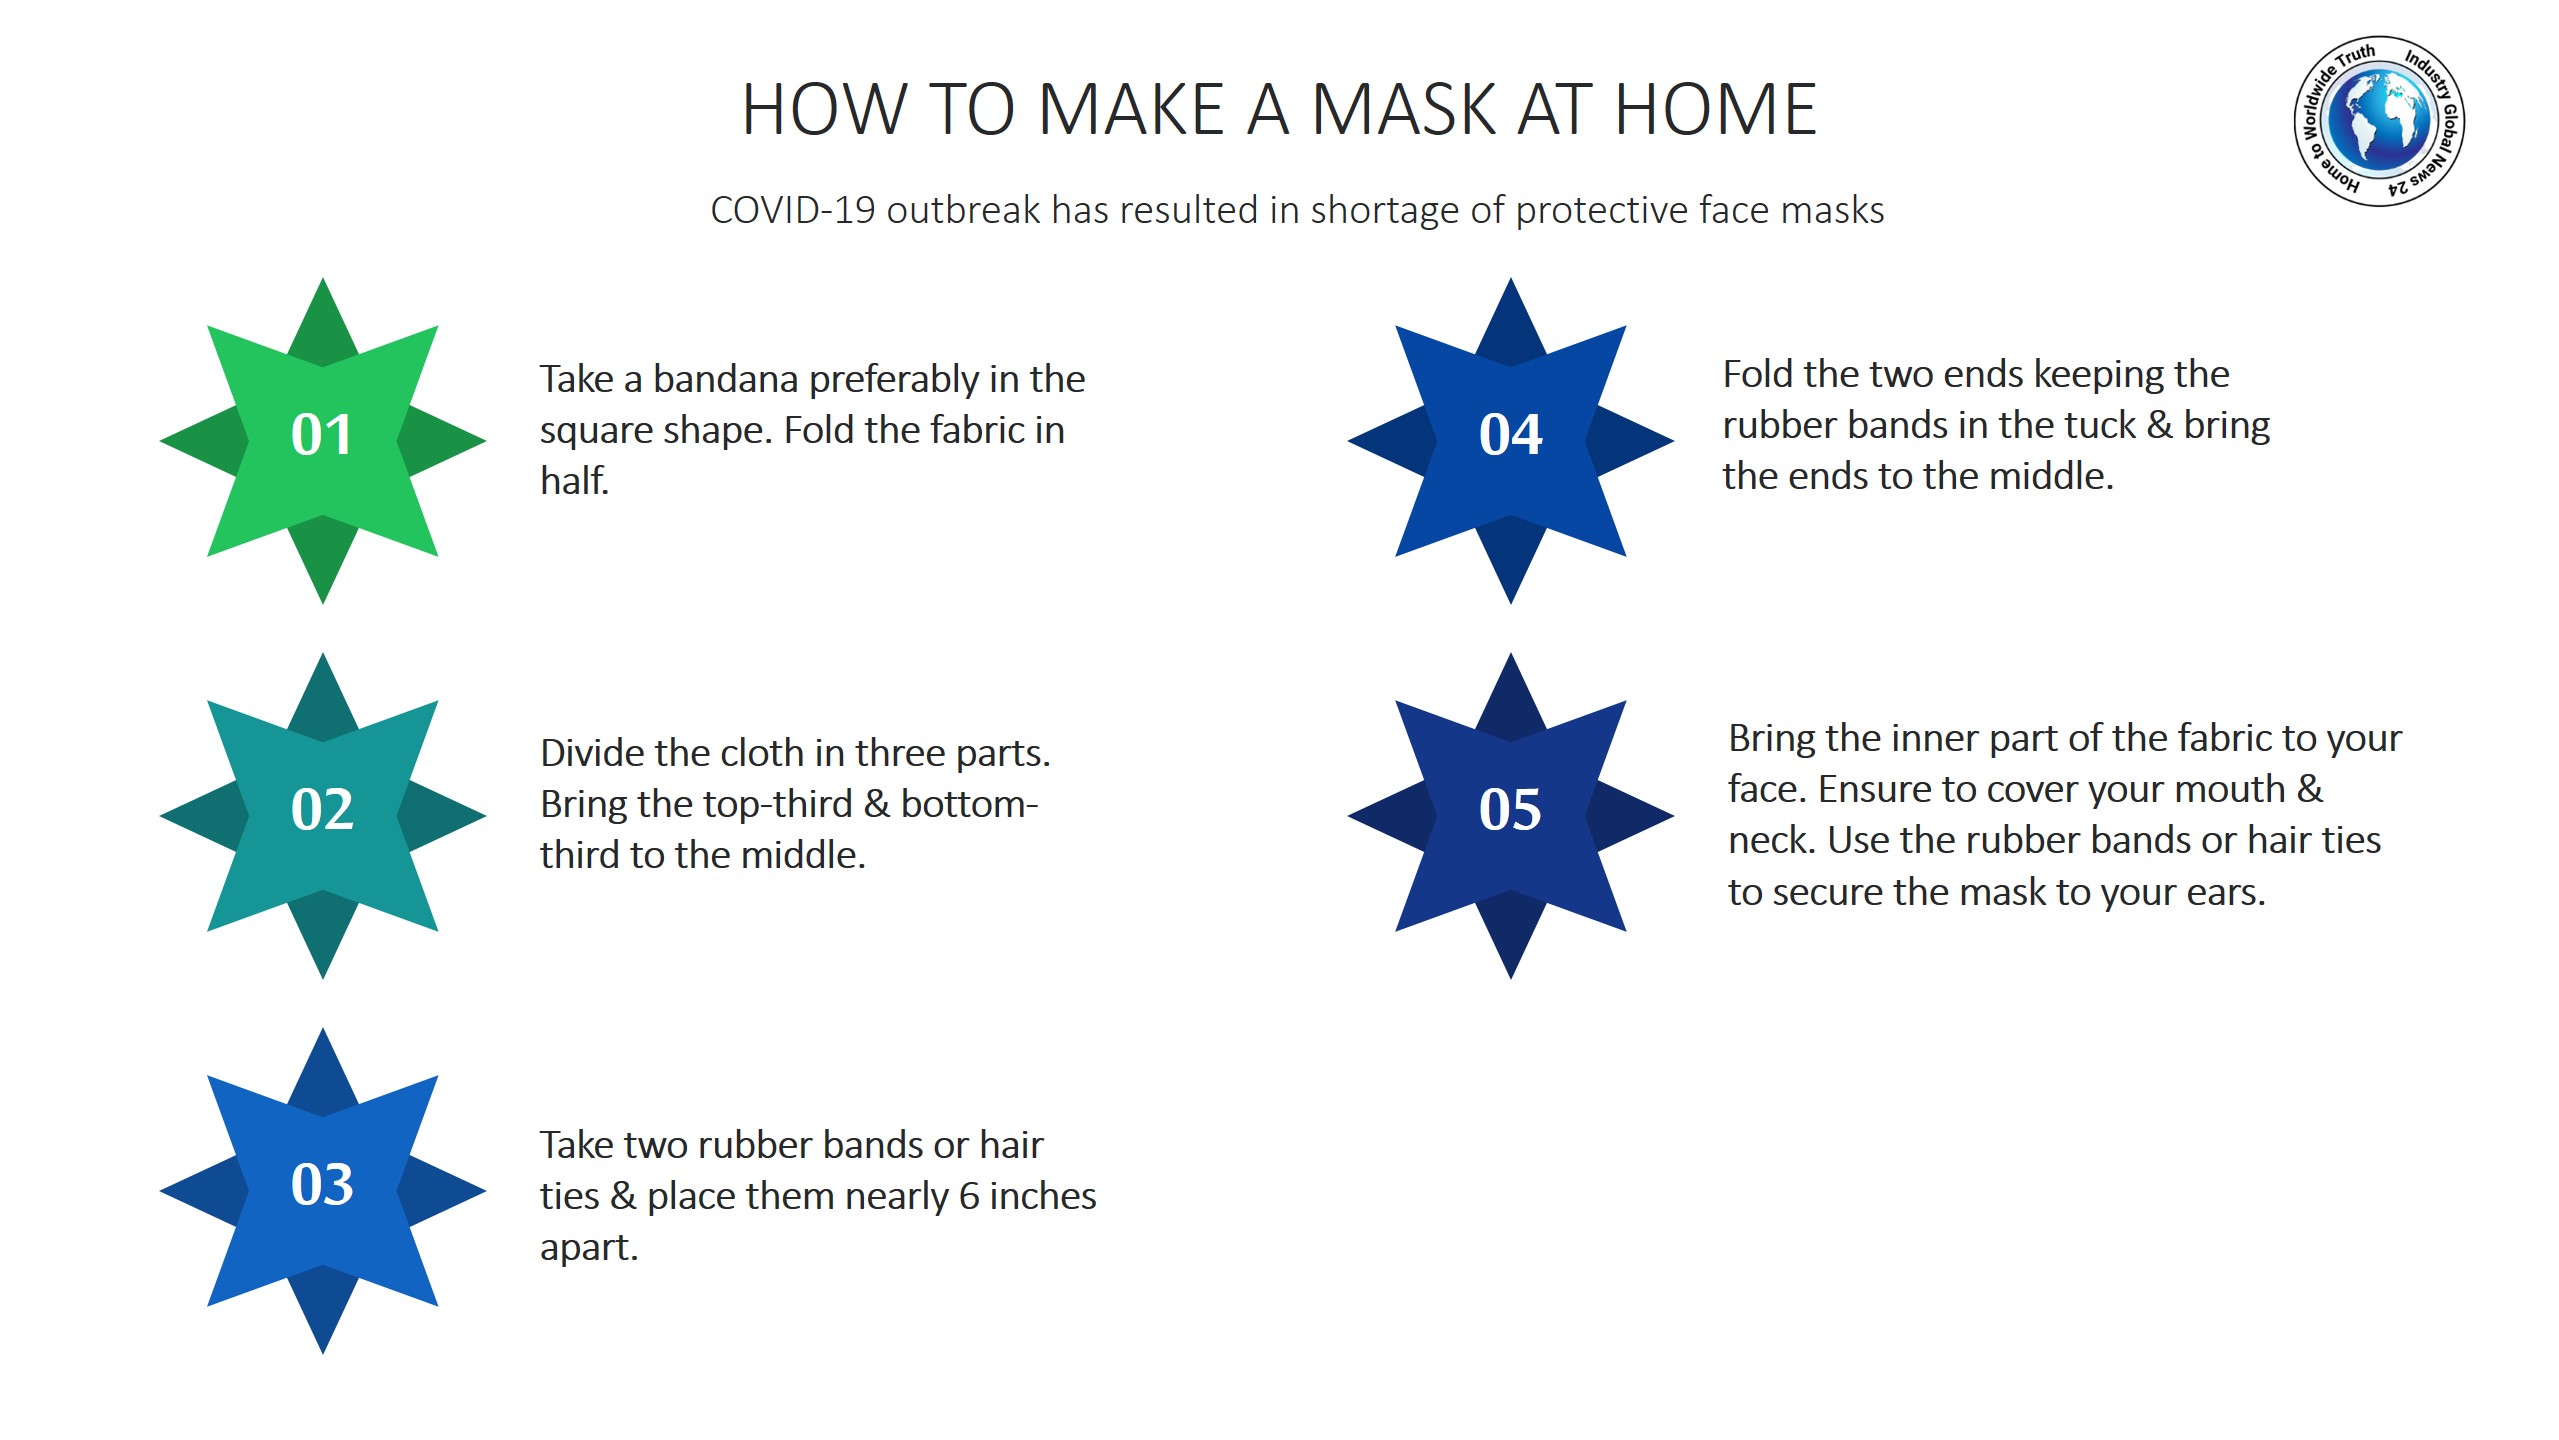 How to make a mask at home